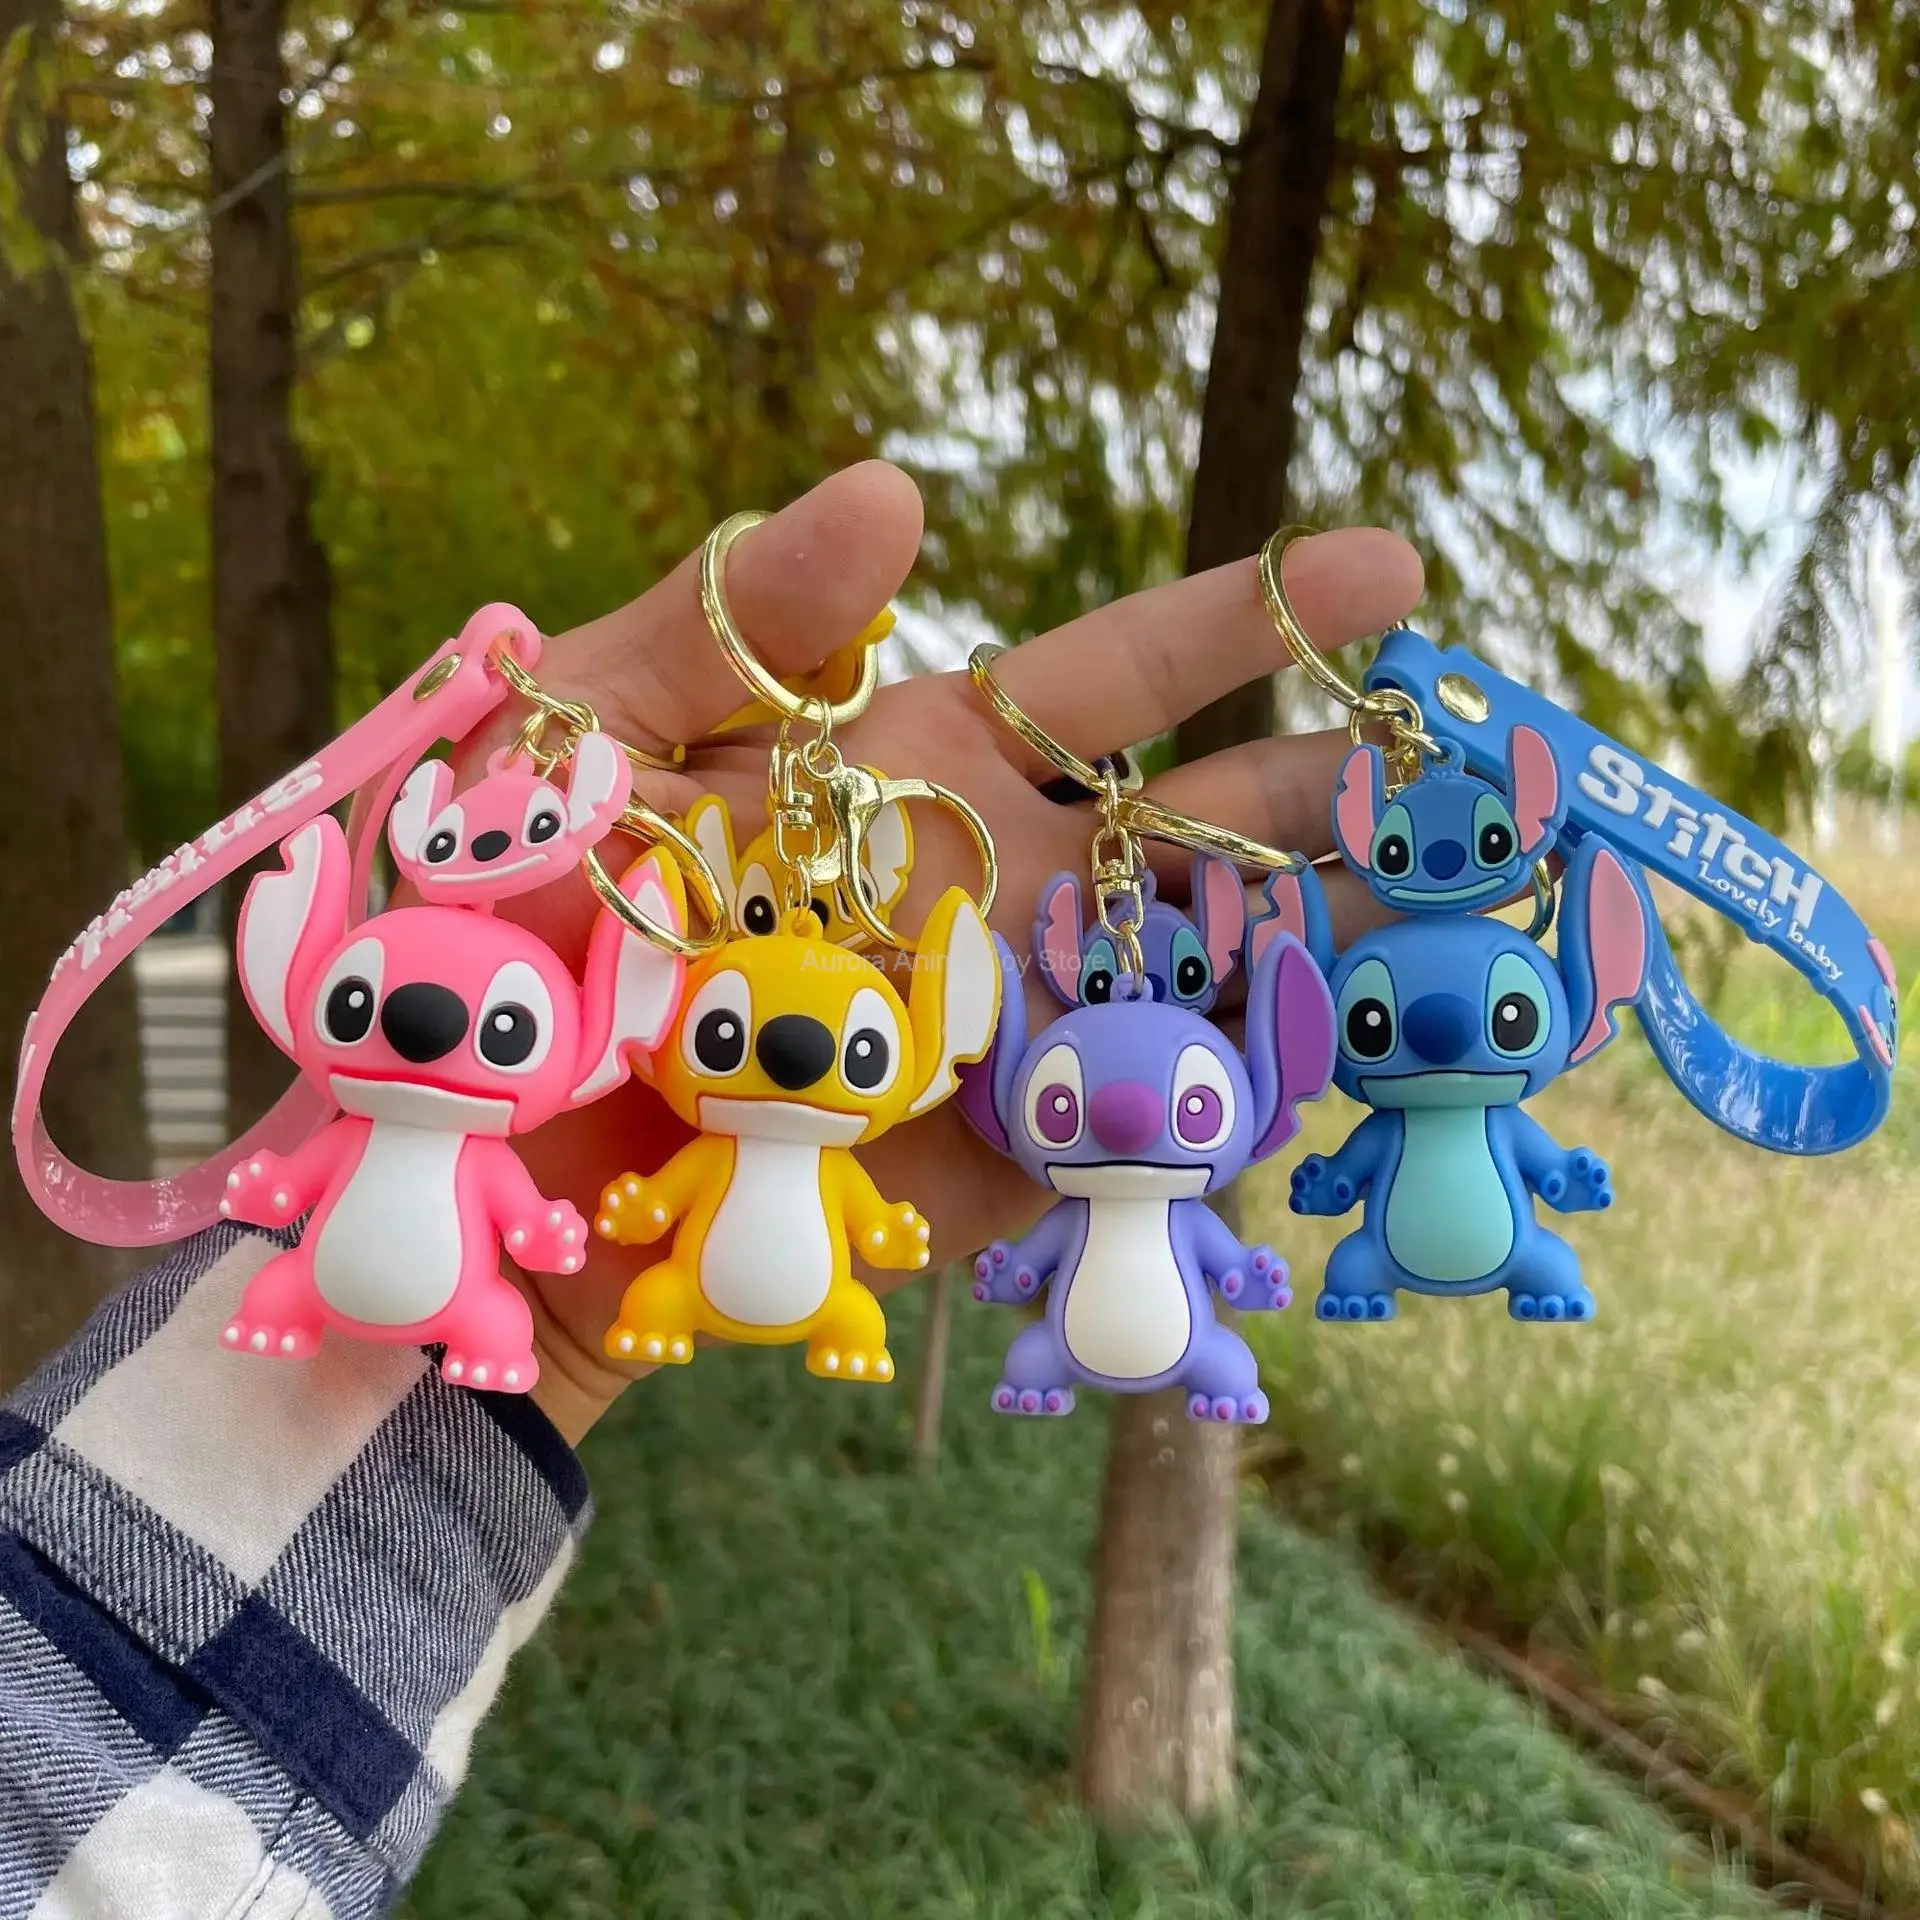 Disney Keychains Creative Anime Cartoon Key Chain Ornaments Dolls Mickey  Mouse Minnie Mouse For Kids Toys Bag Pendant Gifts